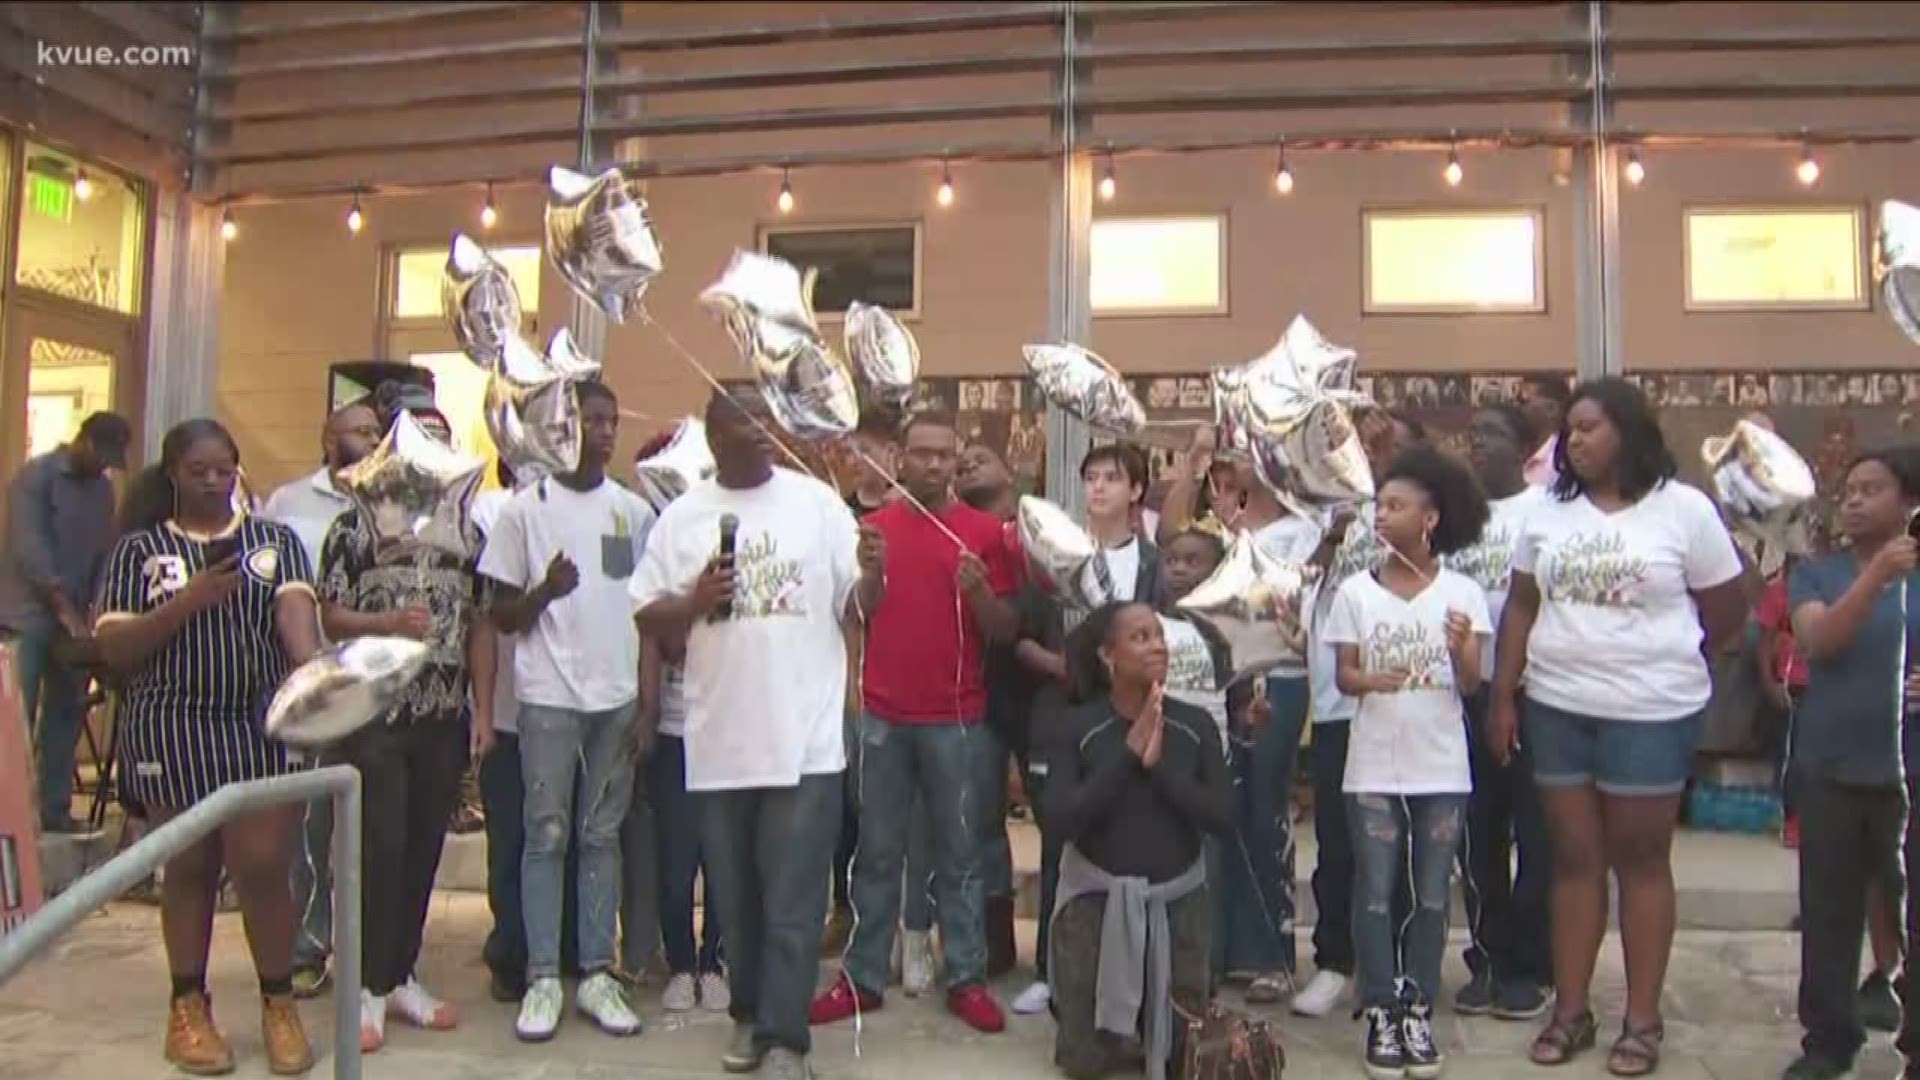 The band Soultree Collective remembered Draylen Mason Thursday by releasing balloons in his honor.